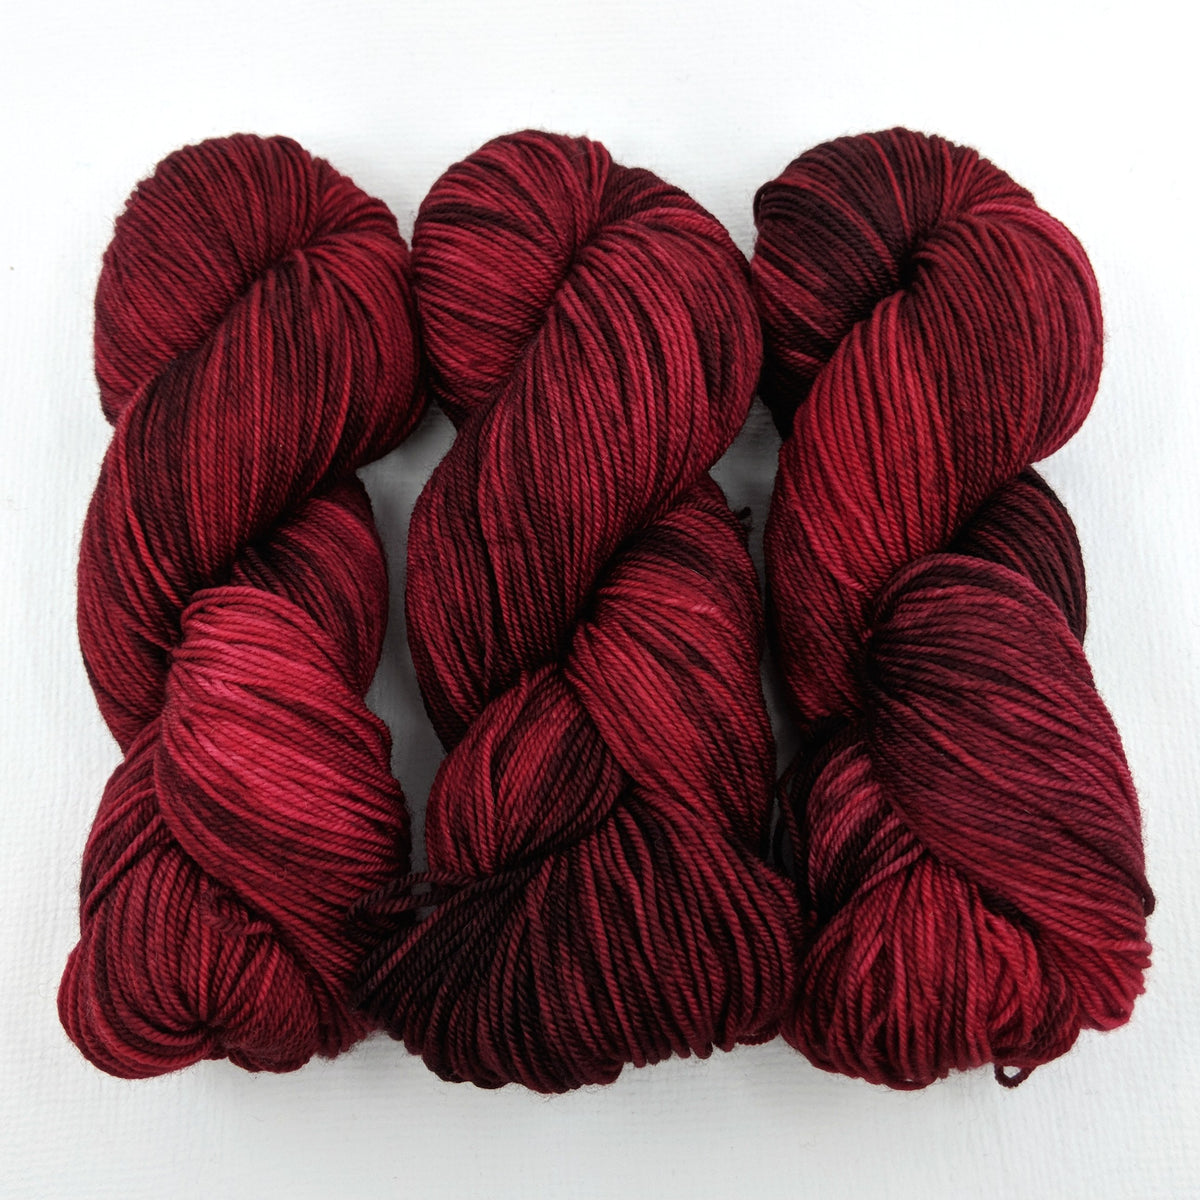 Syrah by Moonlight - Revival Fingering - Dyed Stock